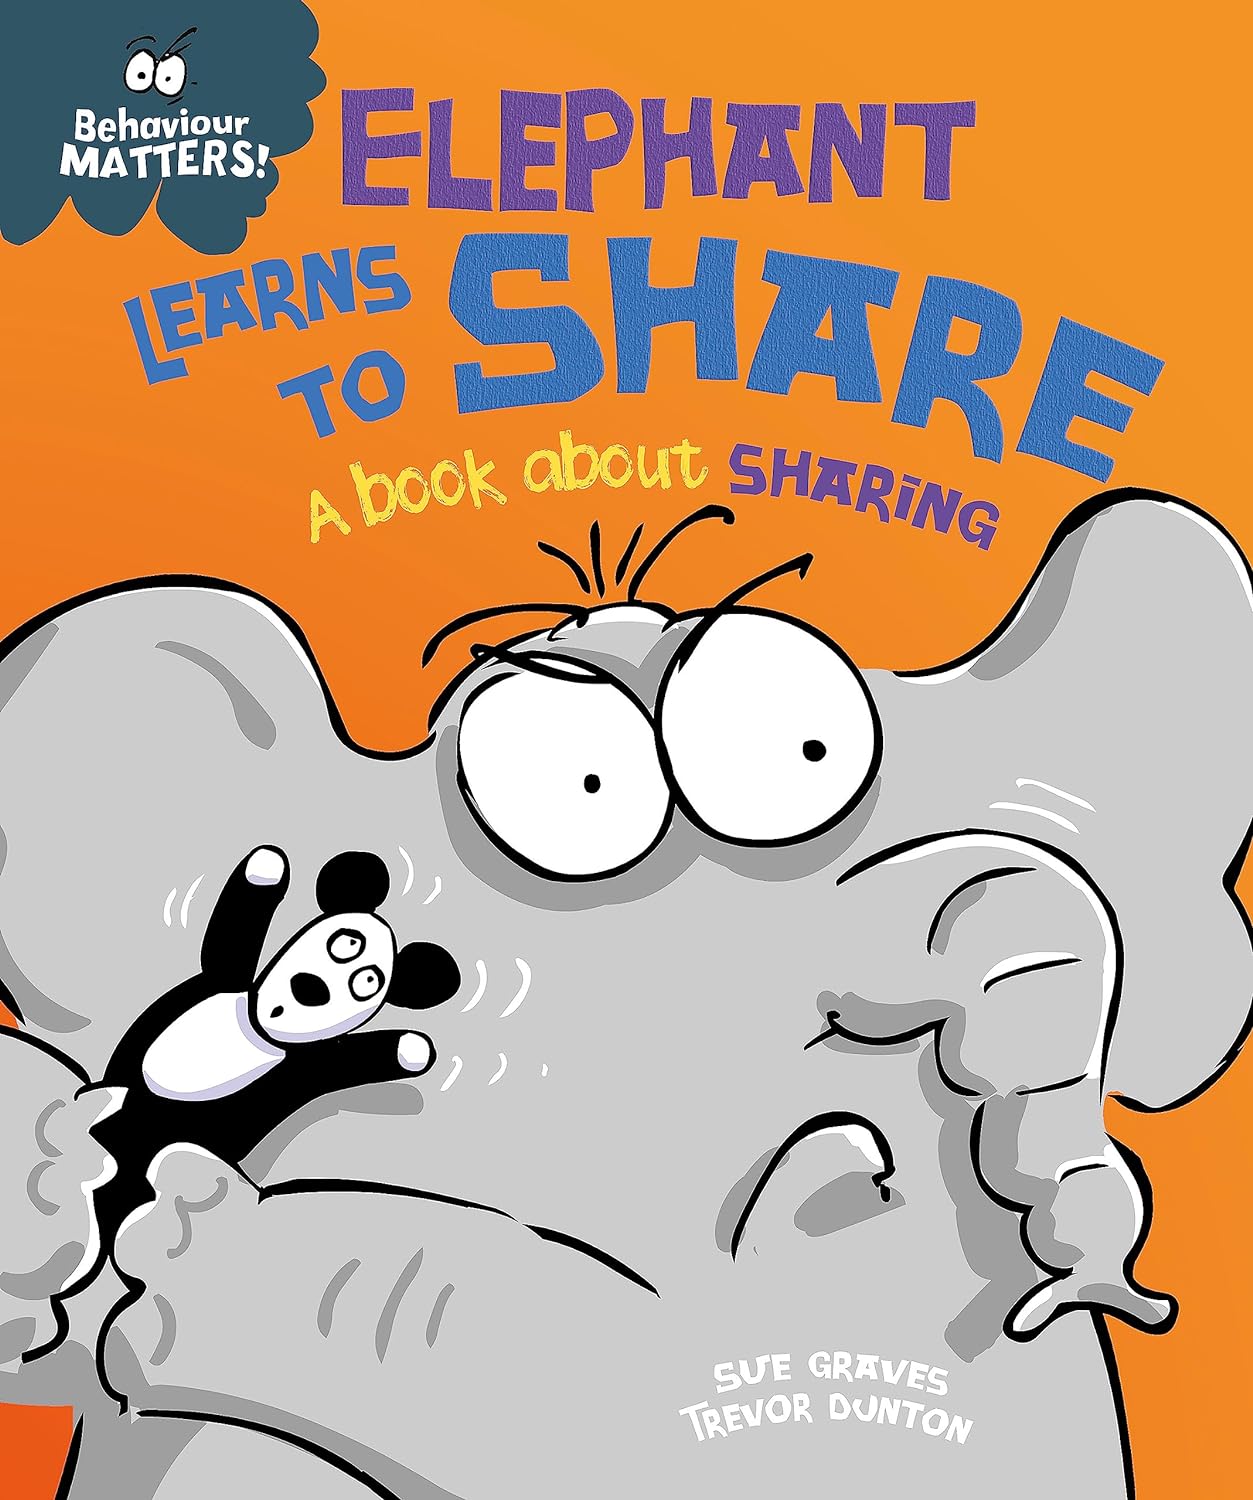 Elephant Learns to Share: A book about sharing (Behaviour Matters)